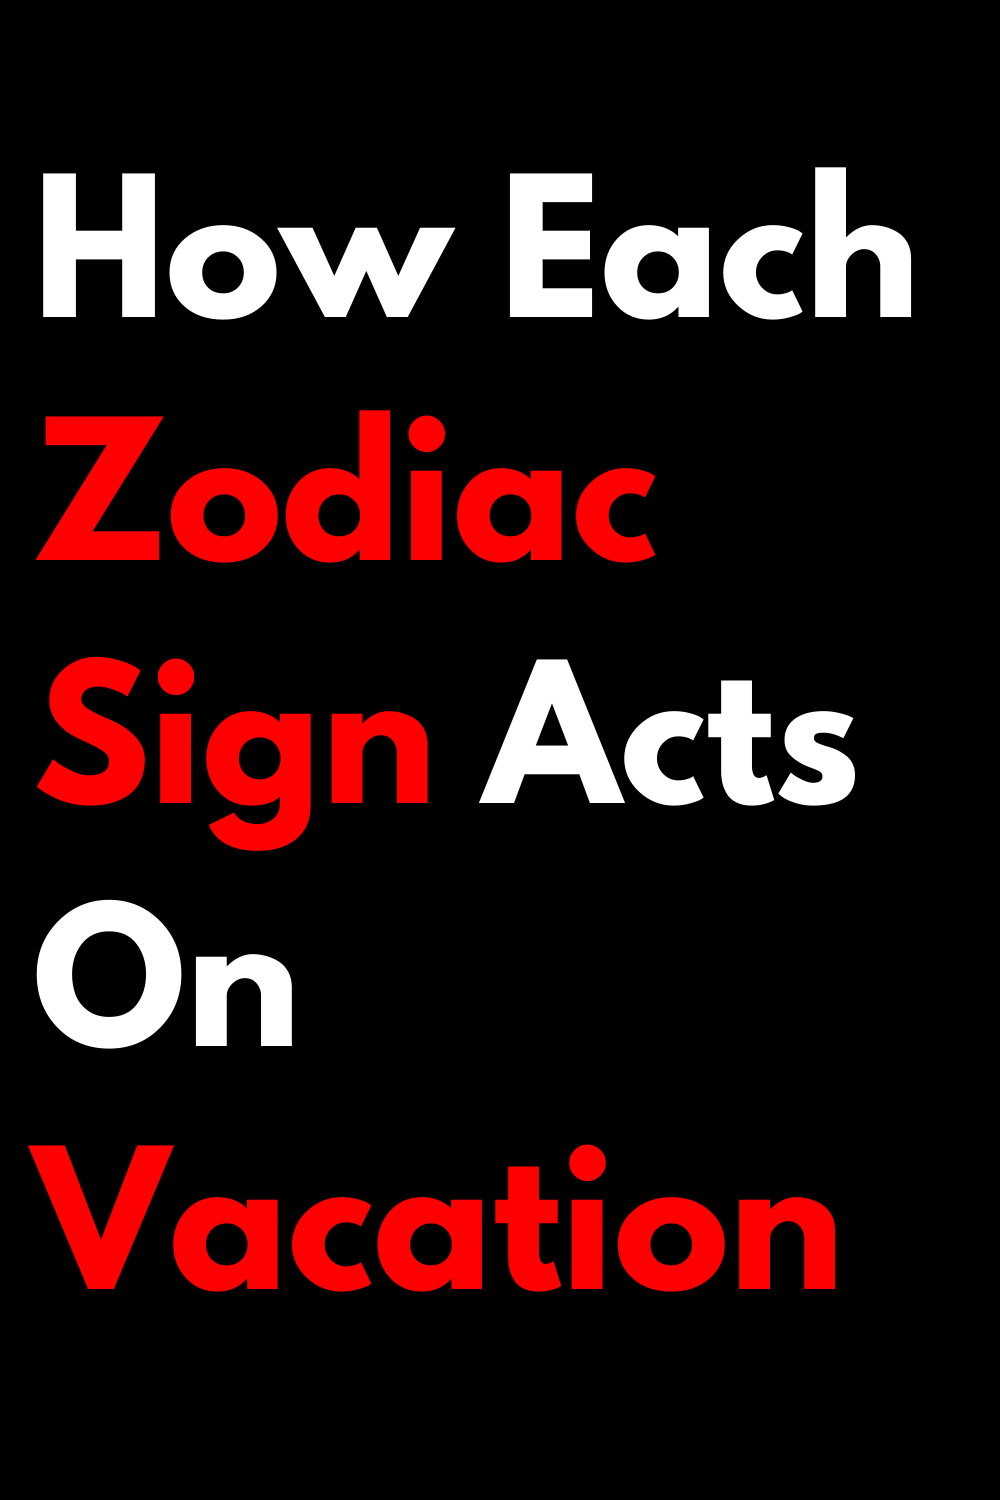 How Each Zodiac Sign Acts On Vacation